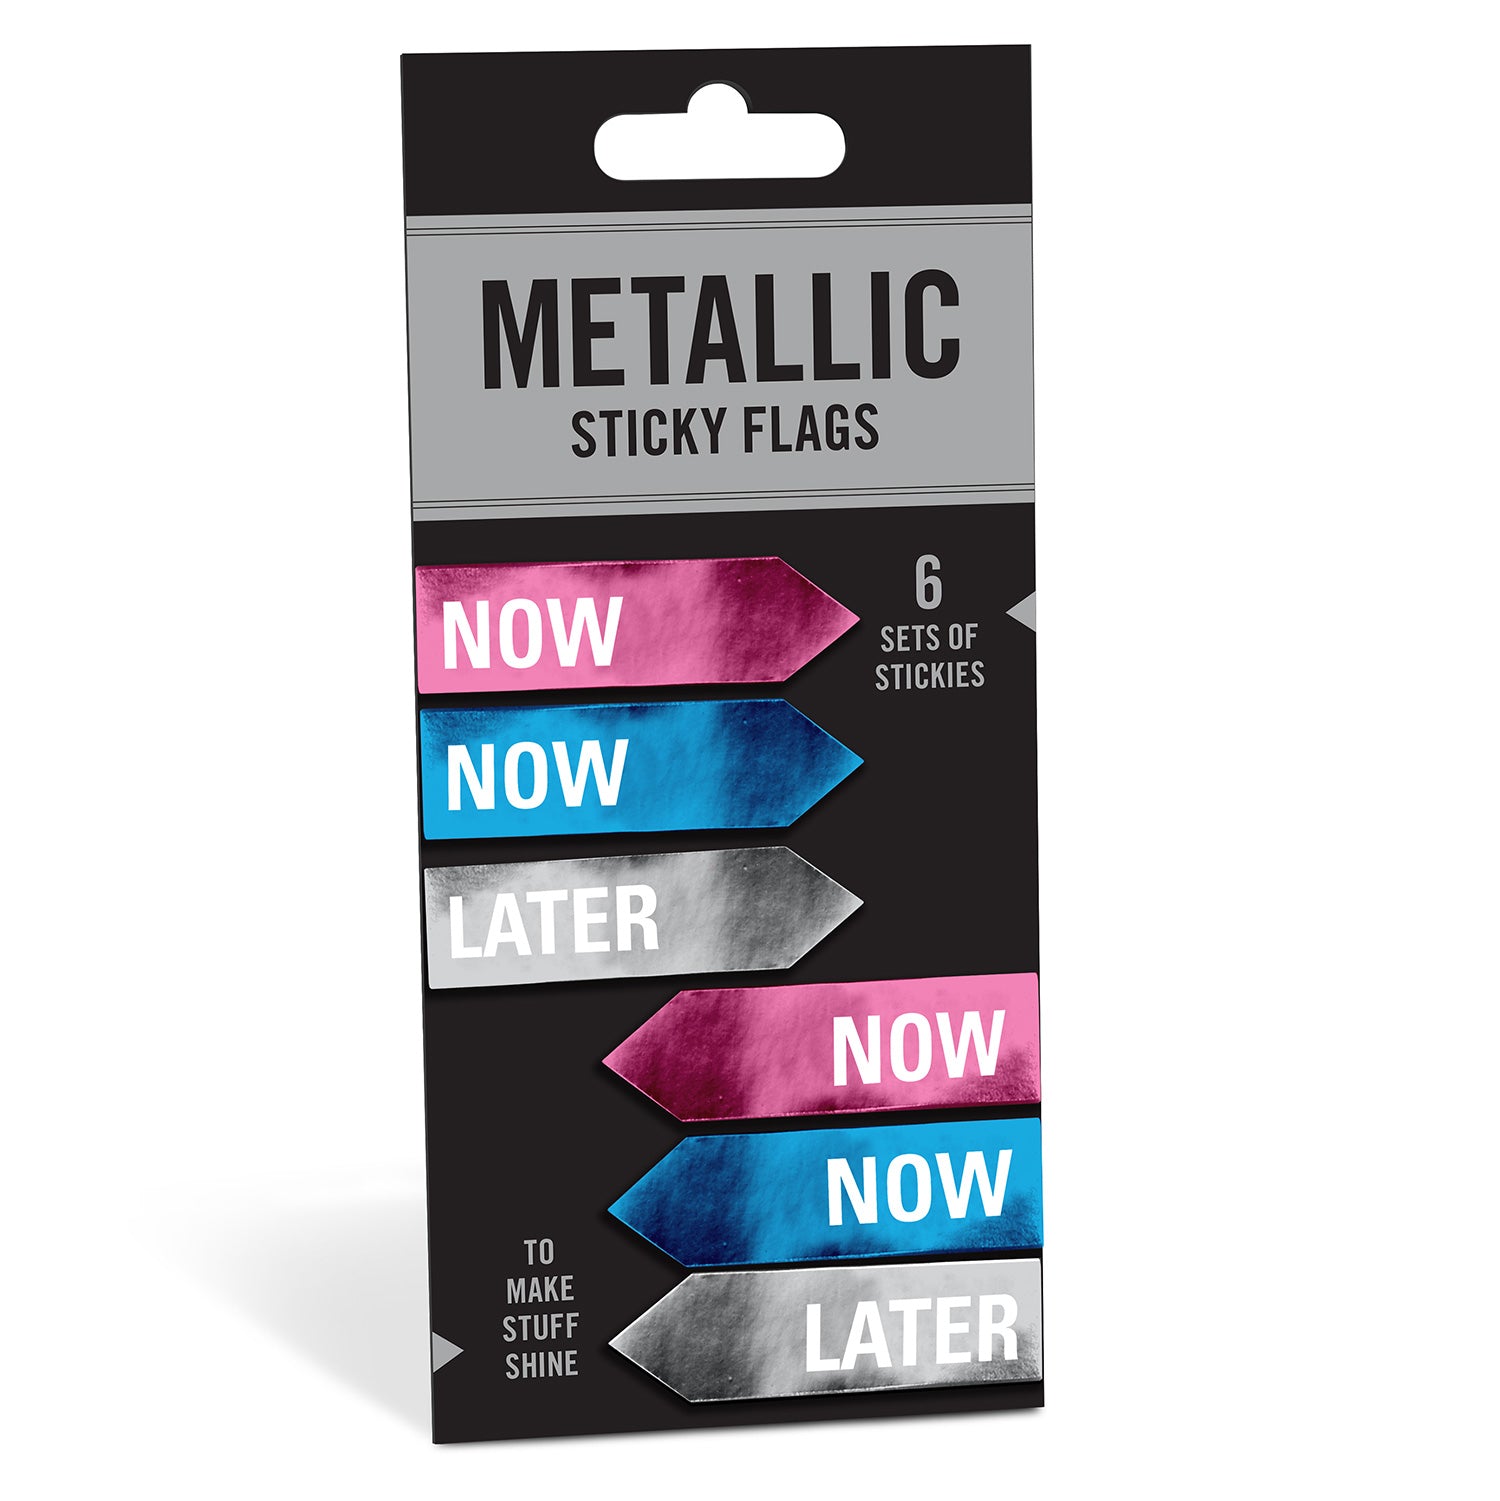 Now / Later Metallic Sticky Flags